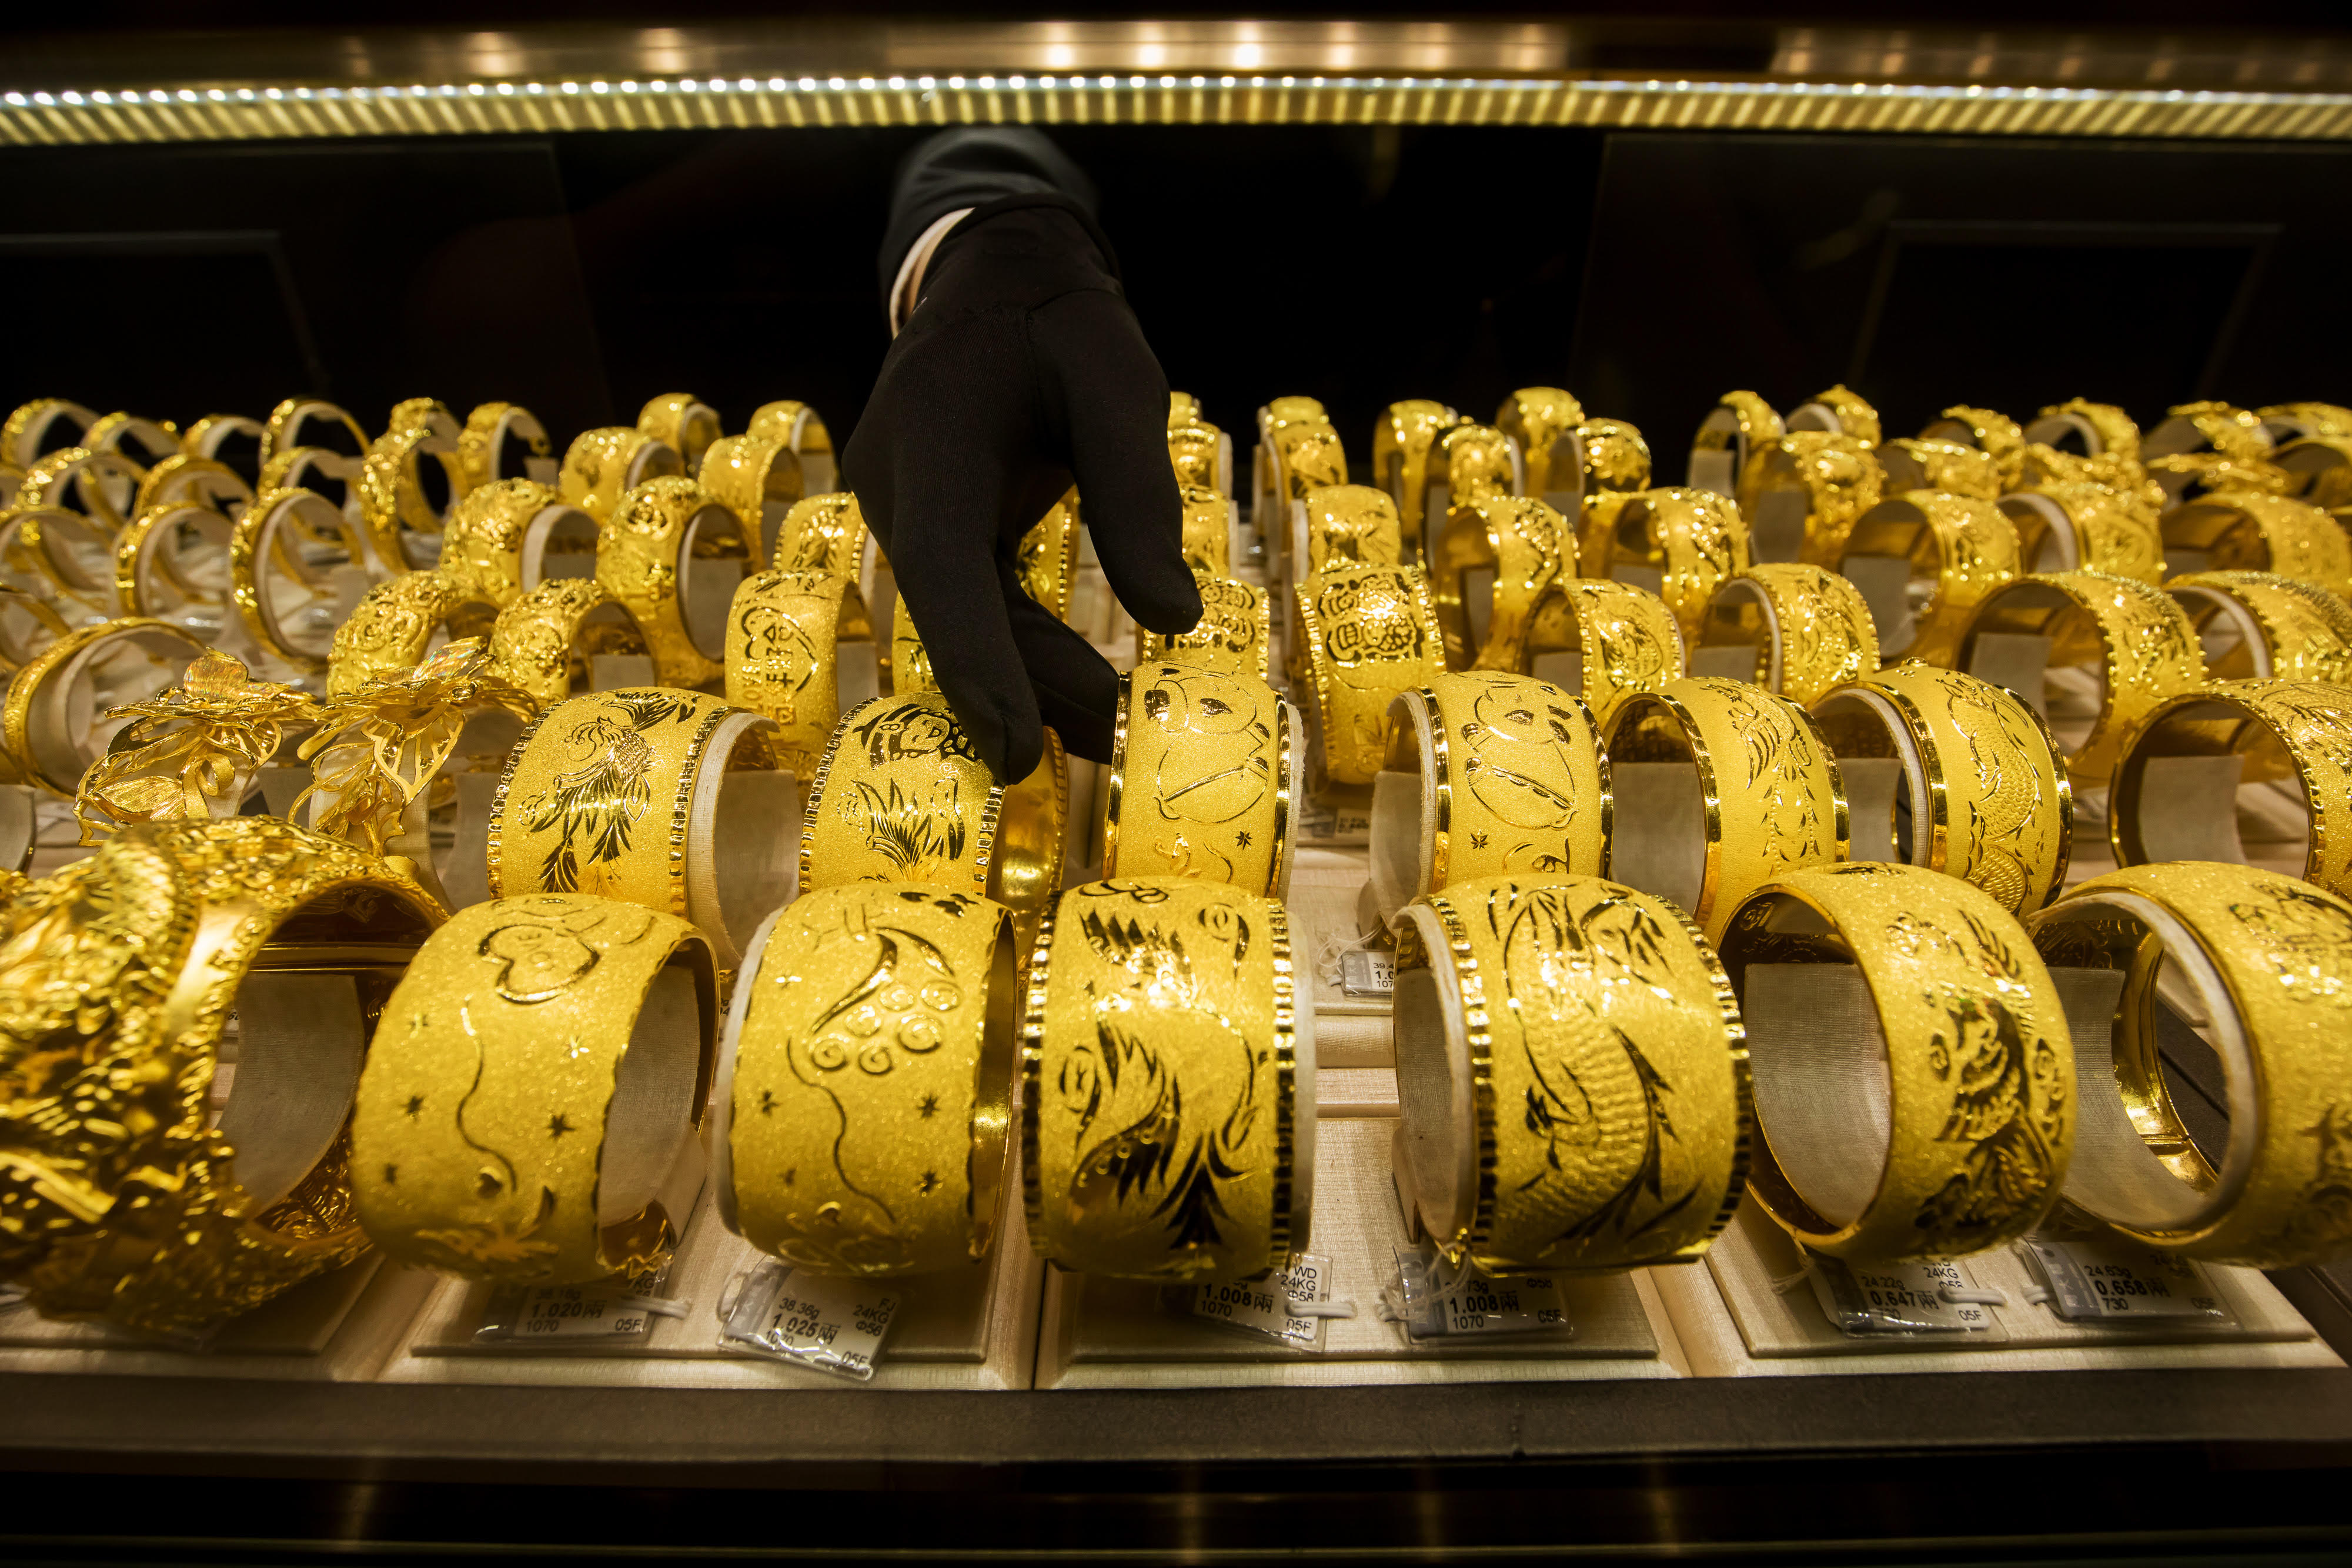 Gold-linked stocks shot up today on growing US-China tensions. Above gold bracelets on display in Hong Kong. Photo: Bloomberg